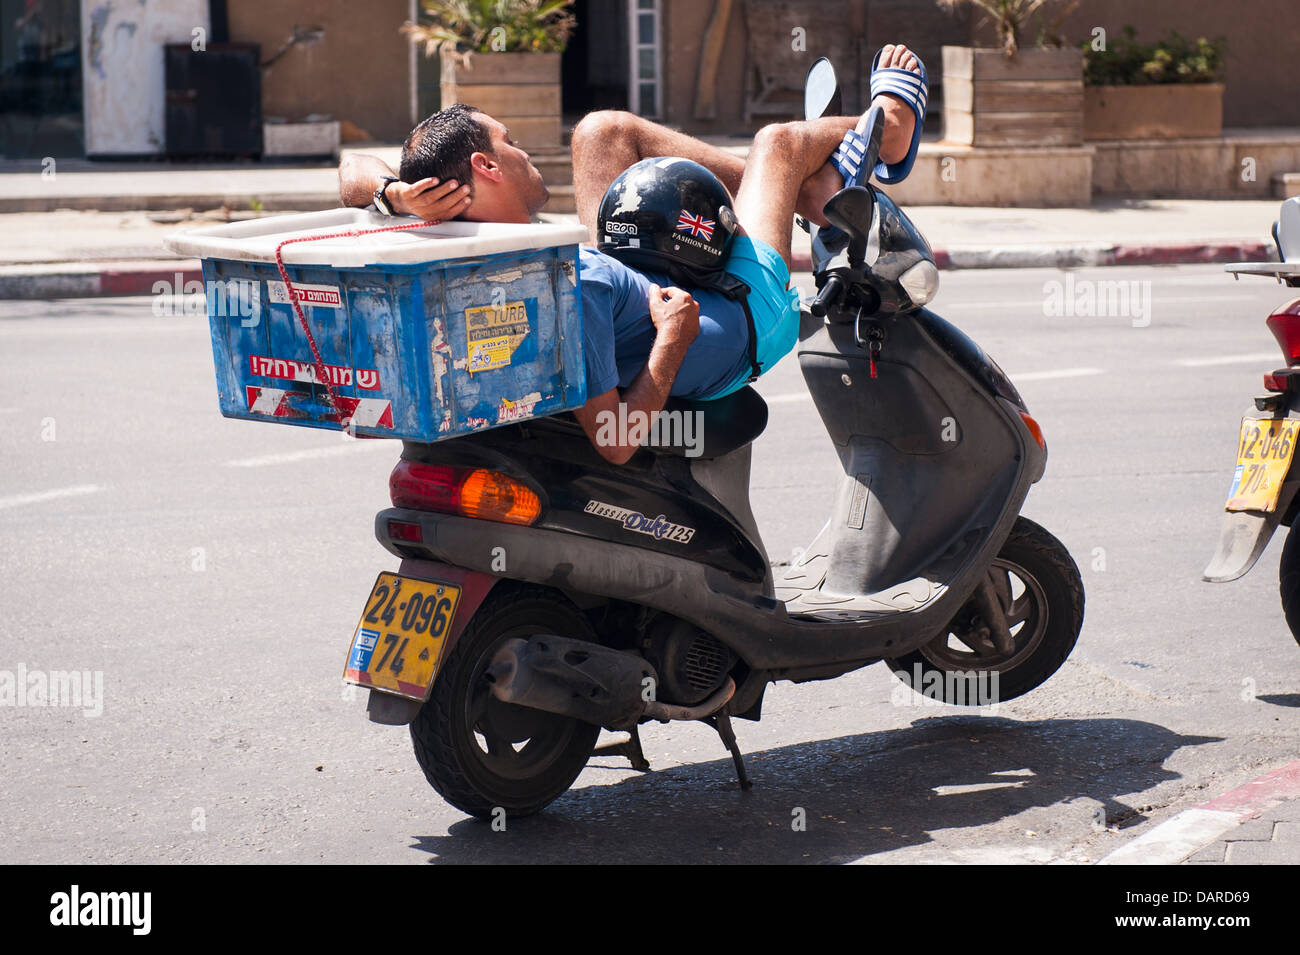 Israel Jaffa Yafo pizza delivery boy man balanced lying in sun on Classic Duke 125 scooter moped motor bike bicycle cycle Stock Photo